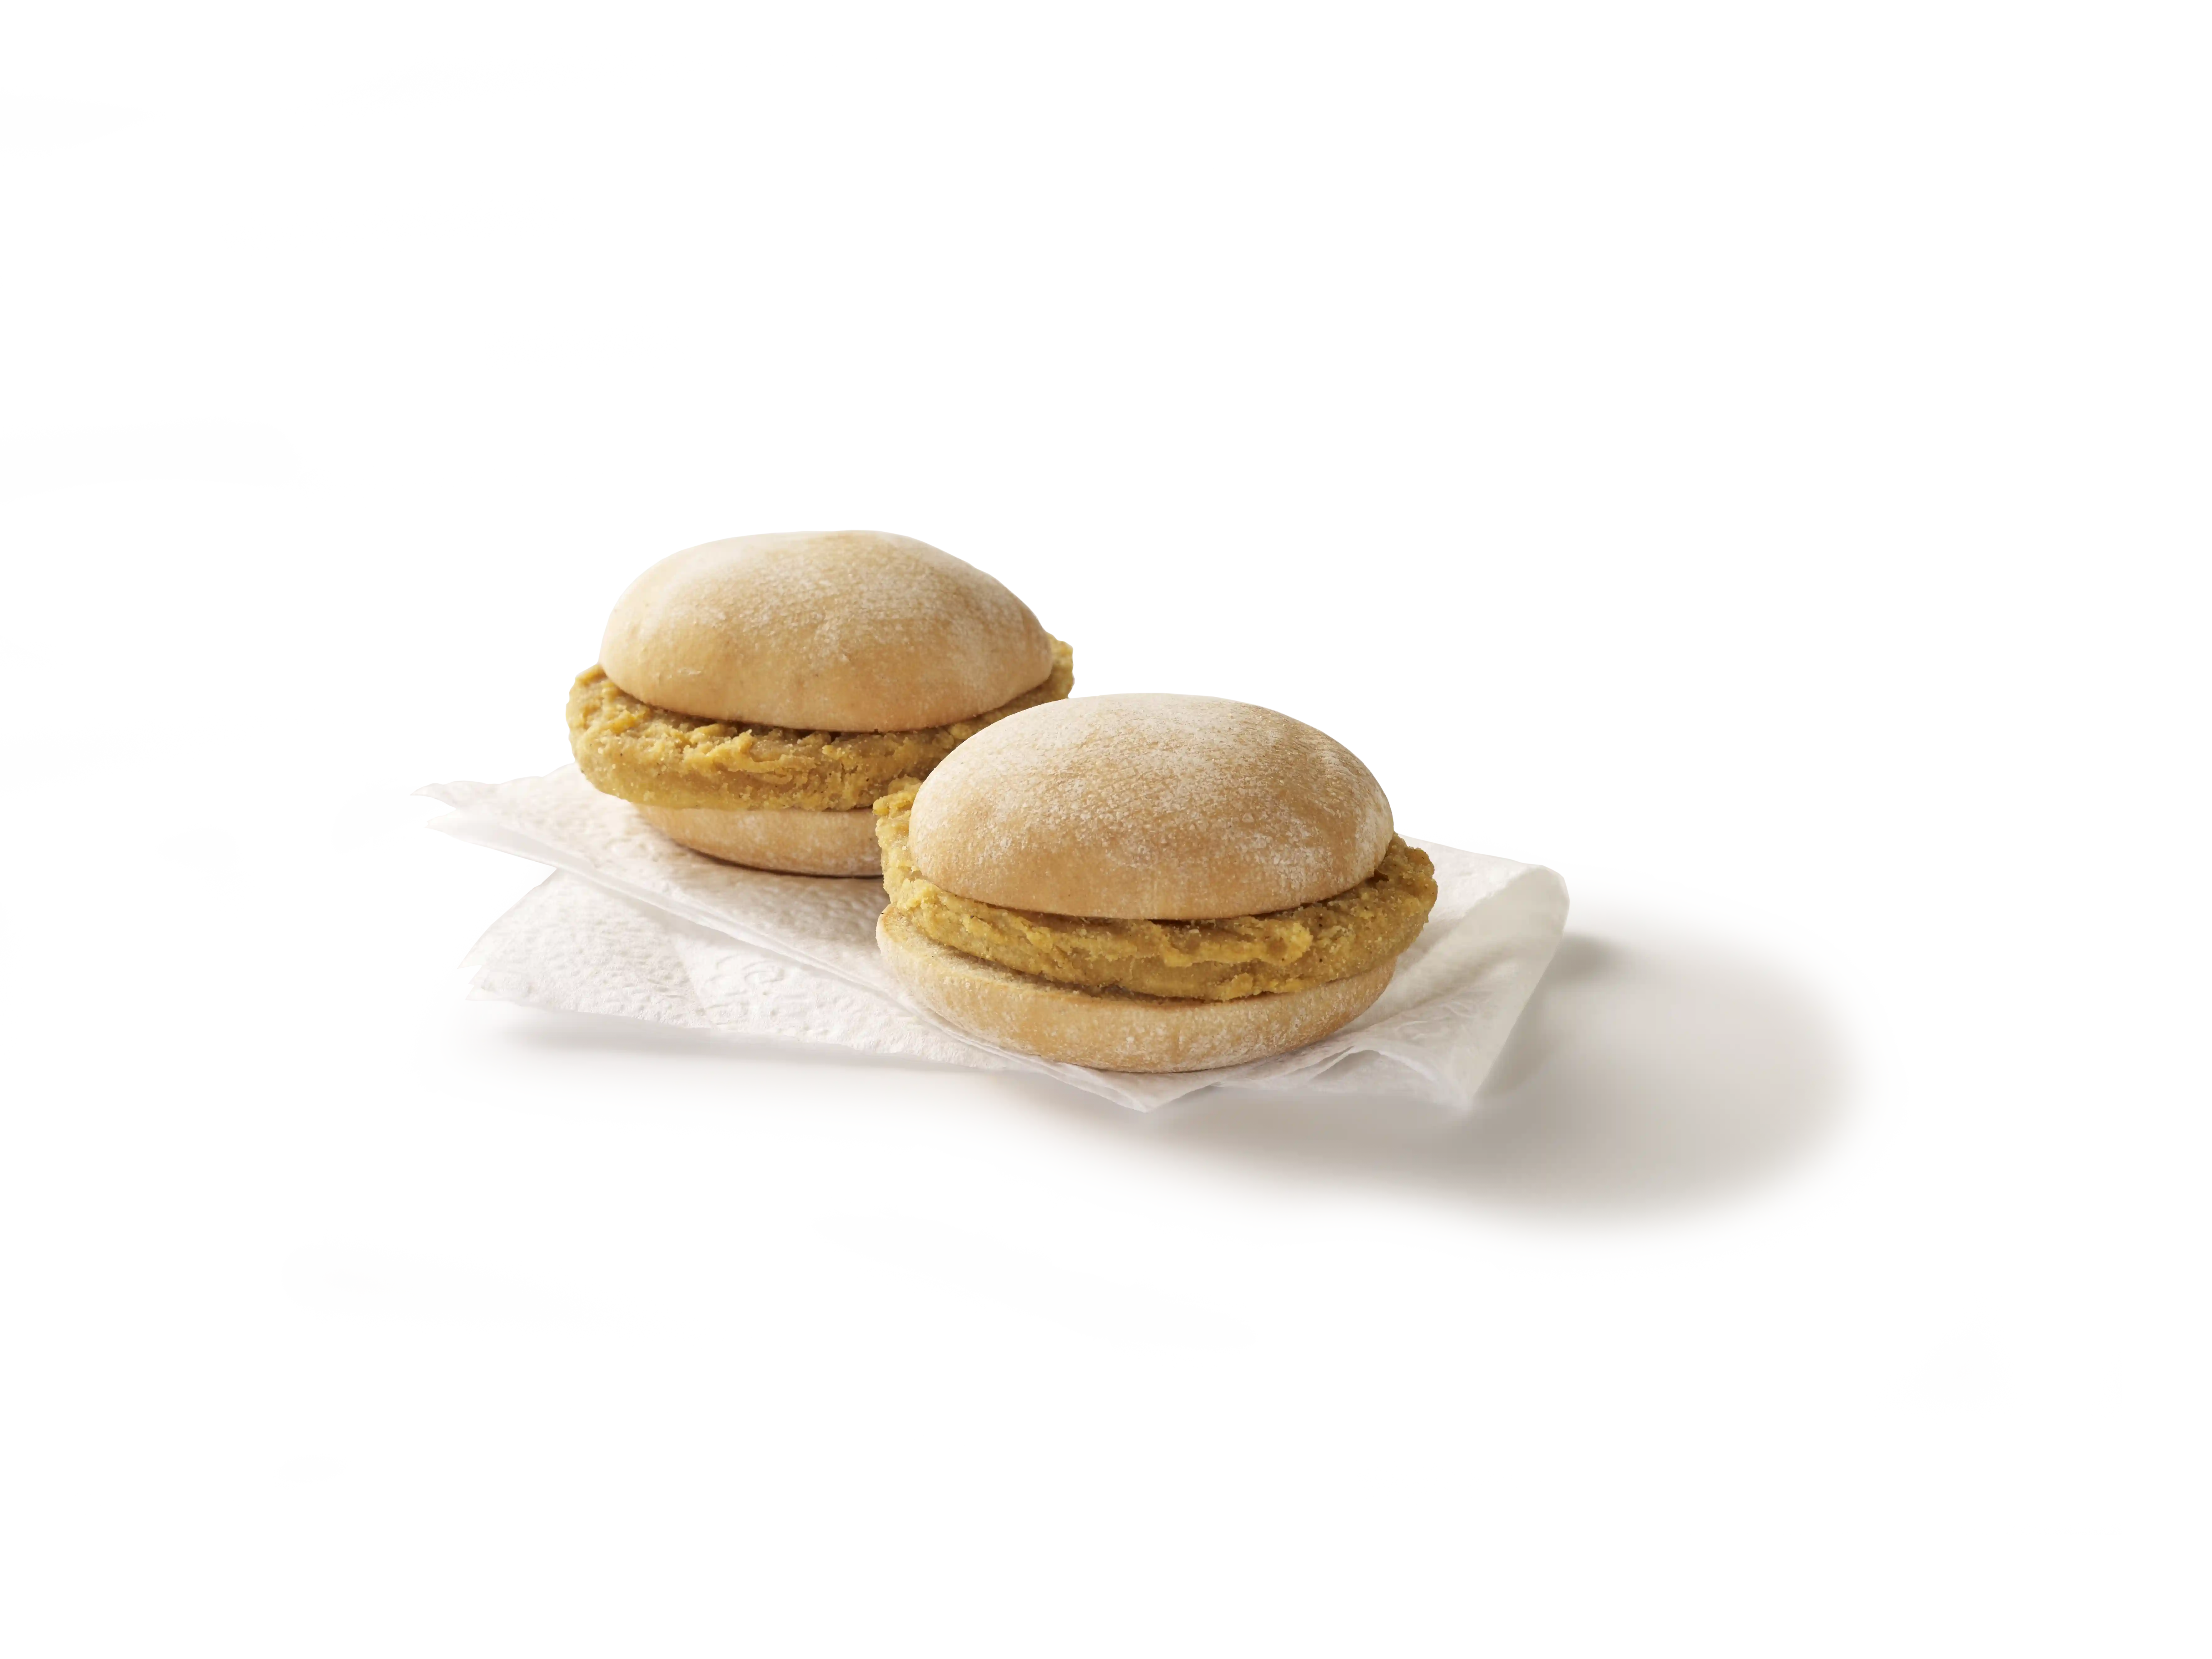 Tyson® Individually Wrapped Breaded Chicken Mini Twin Sandwiches, 80/5.40 oz.https://images.salsify.com/image/upload/s--eE_6dz8p--/q_25/zadxj1qdcxqkejqh4beb.webp